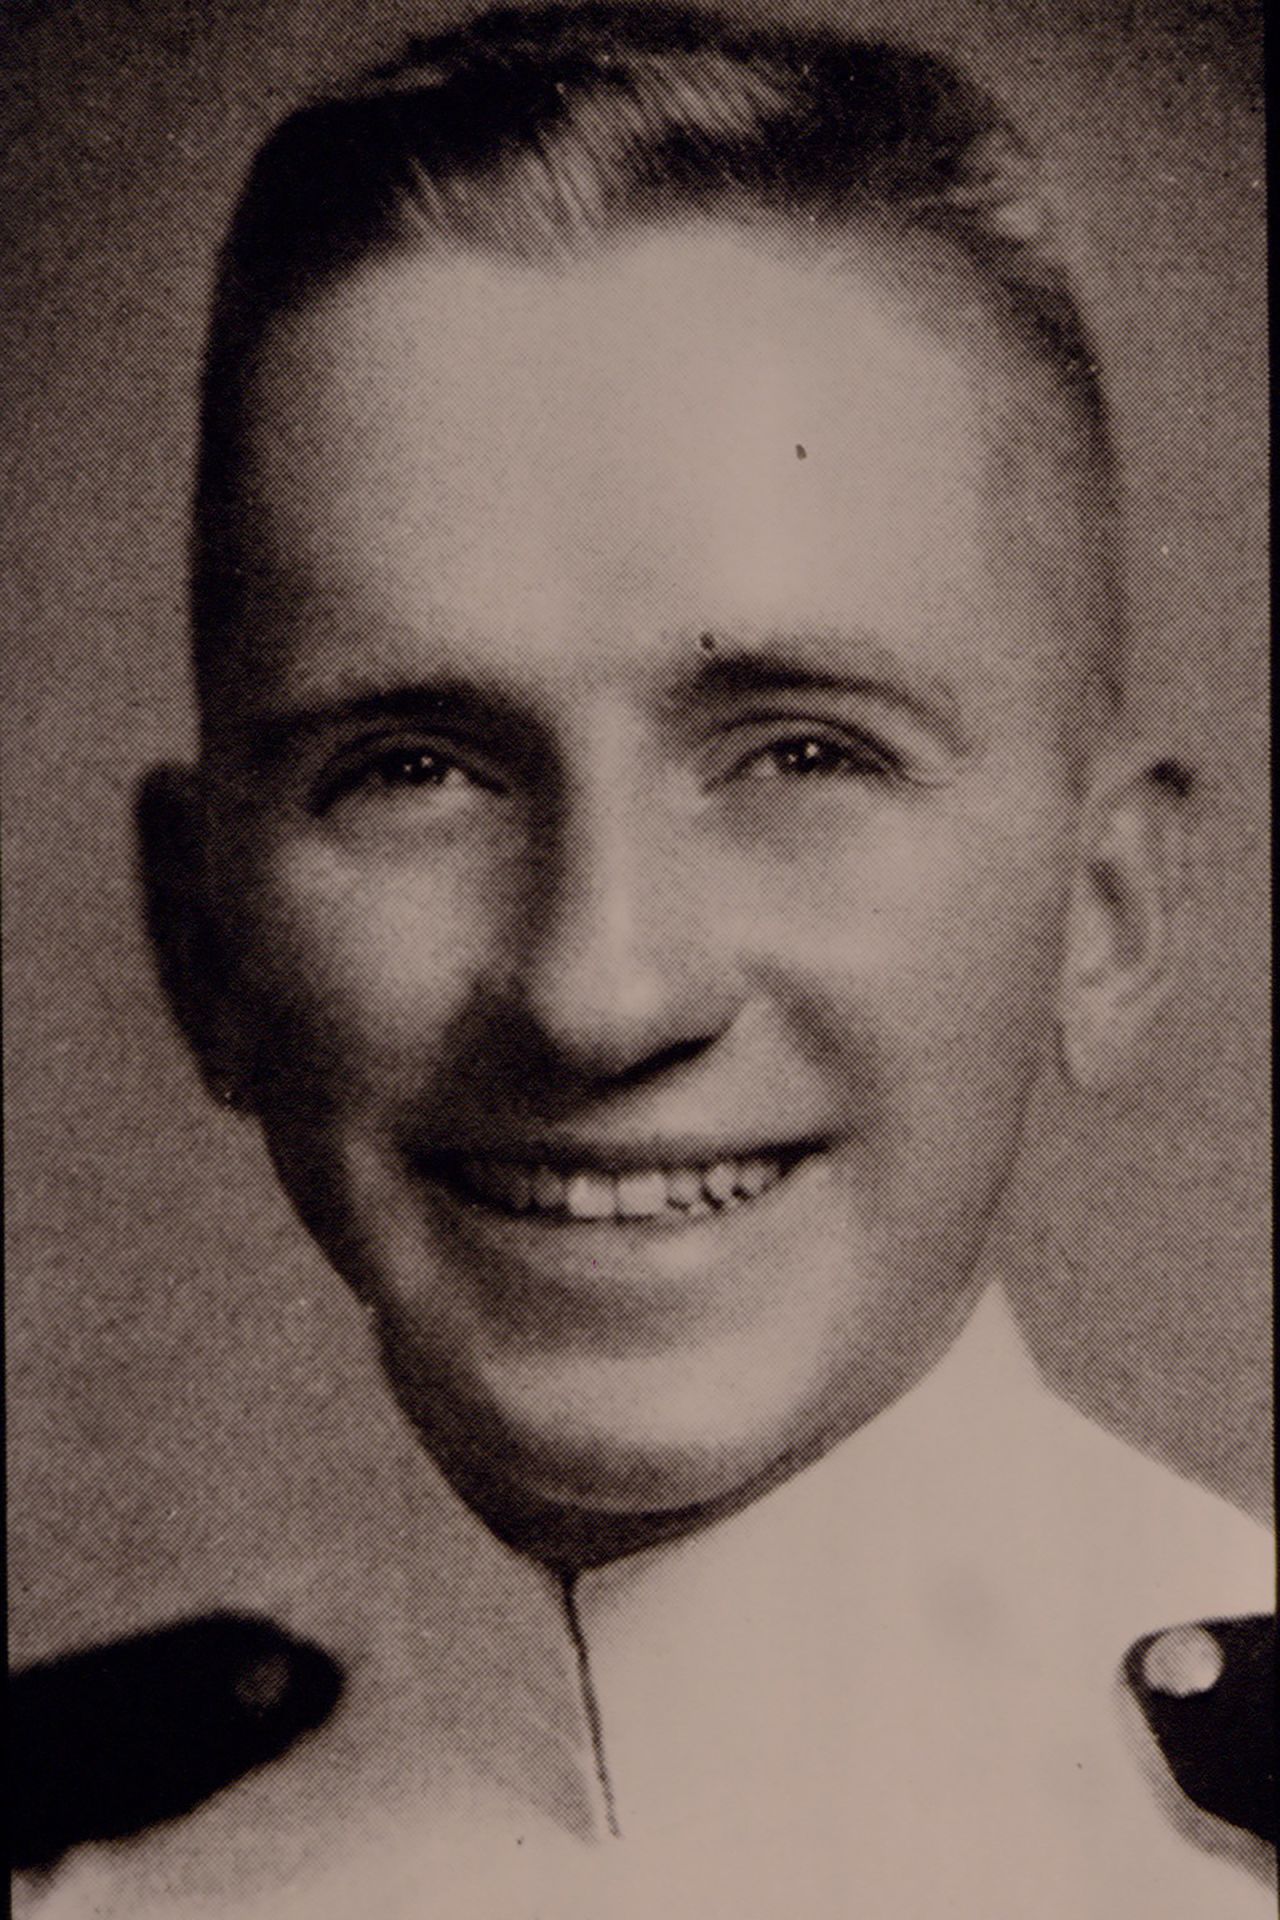 After community college, Perot attended the US Naval Academy. He graduated in 1953 and served in the Navy until 1957, when he became a data processing salesman for IBM. In 1962, Perot founded his own data processing business. By 1968, it made him a billionaire.